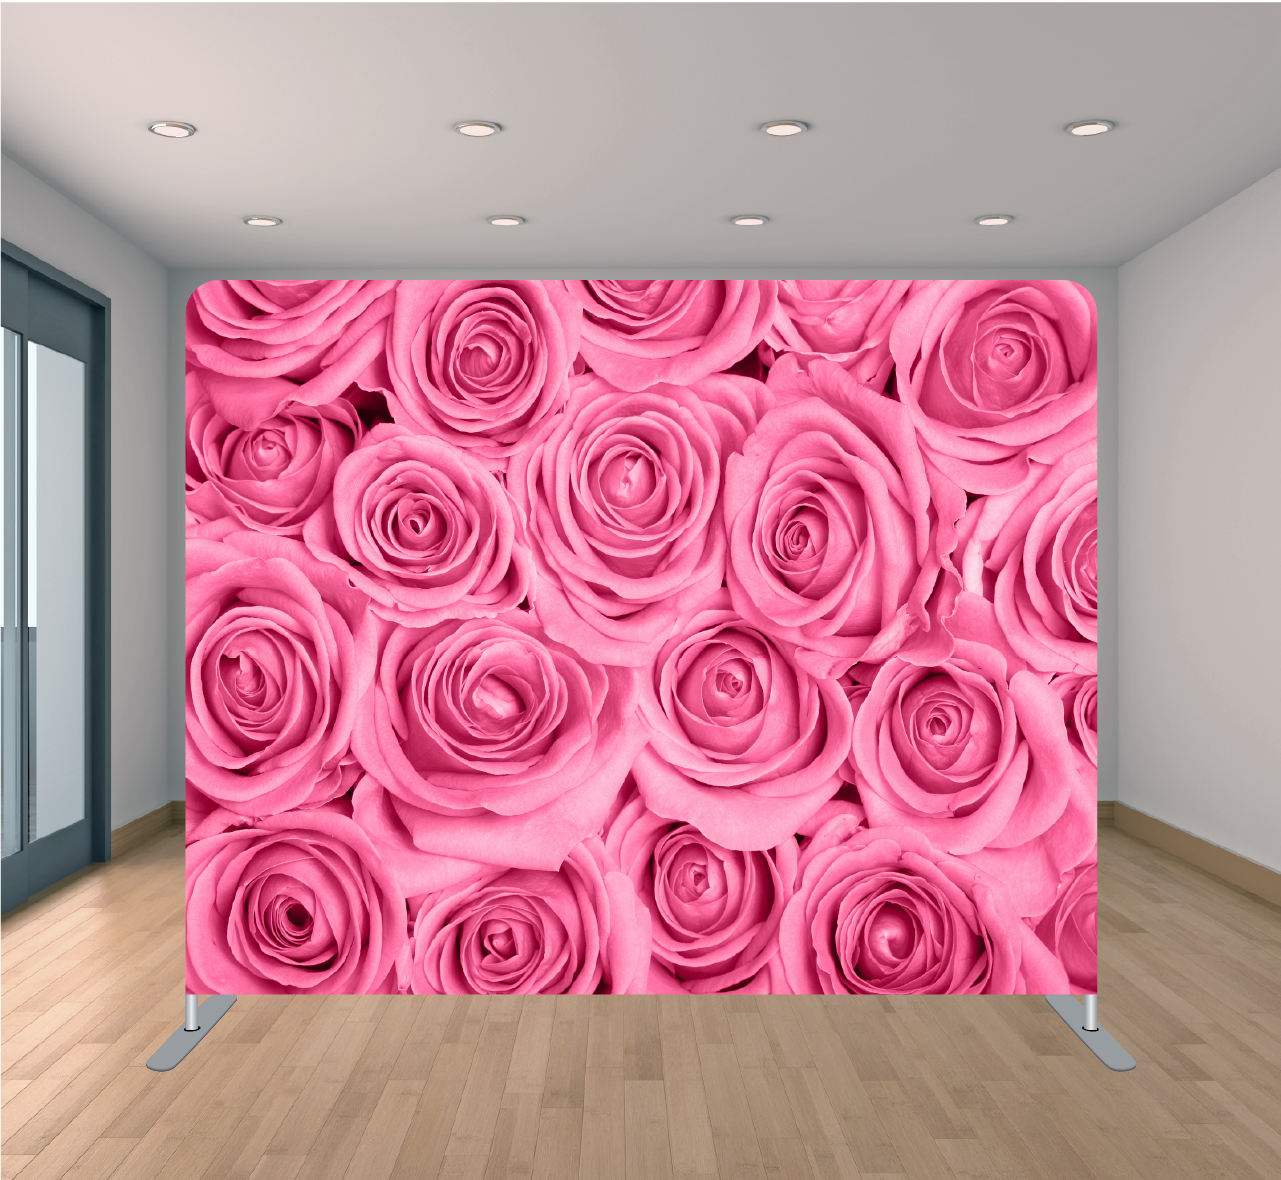 8x8ft Pillowcase Tension Backdrop- Pink Roses